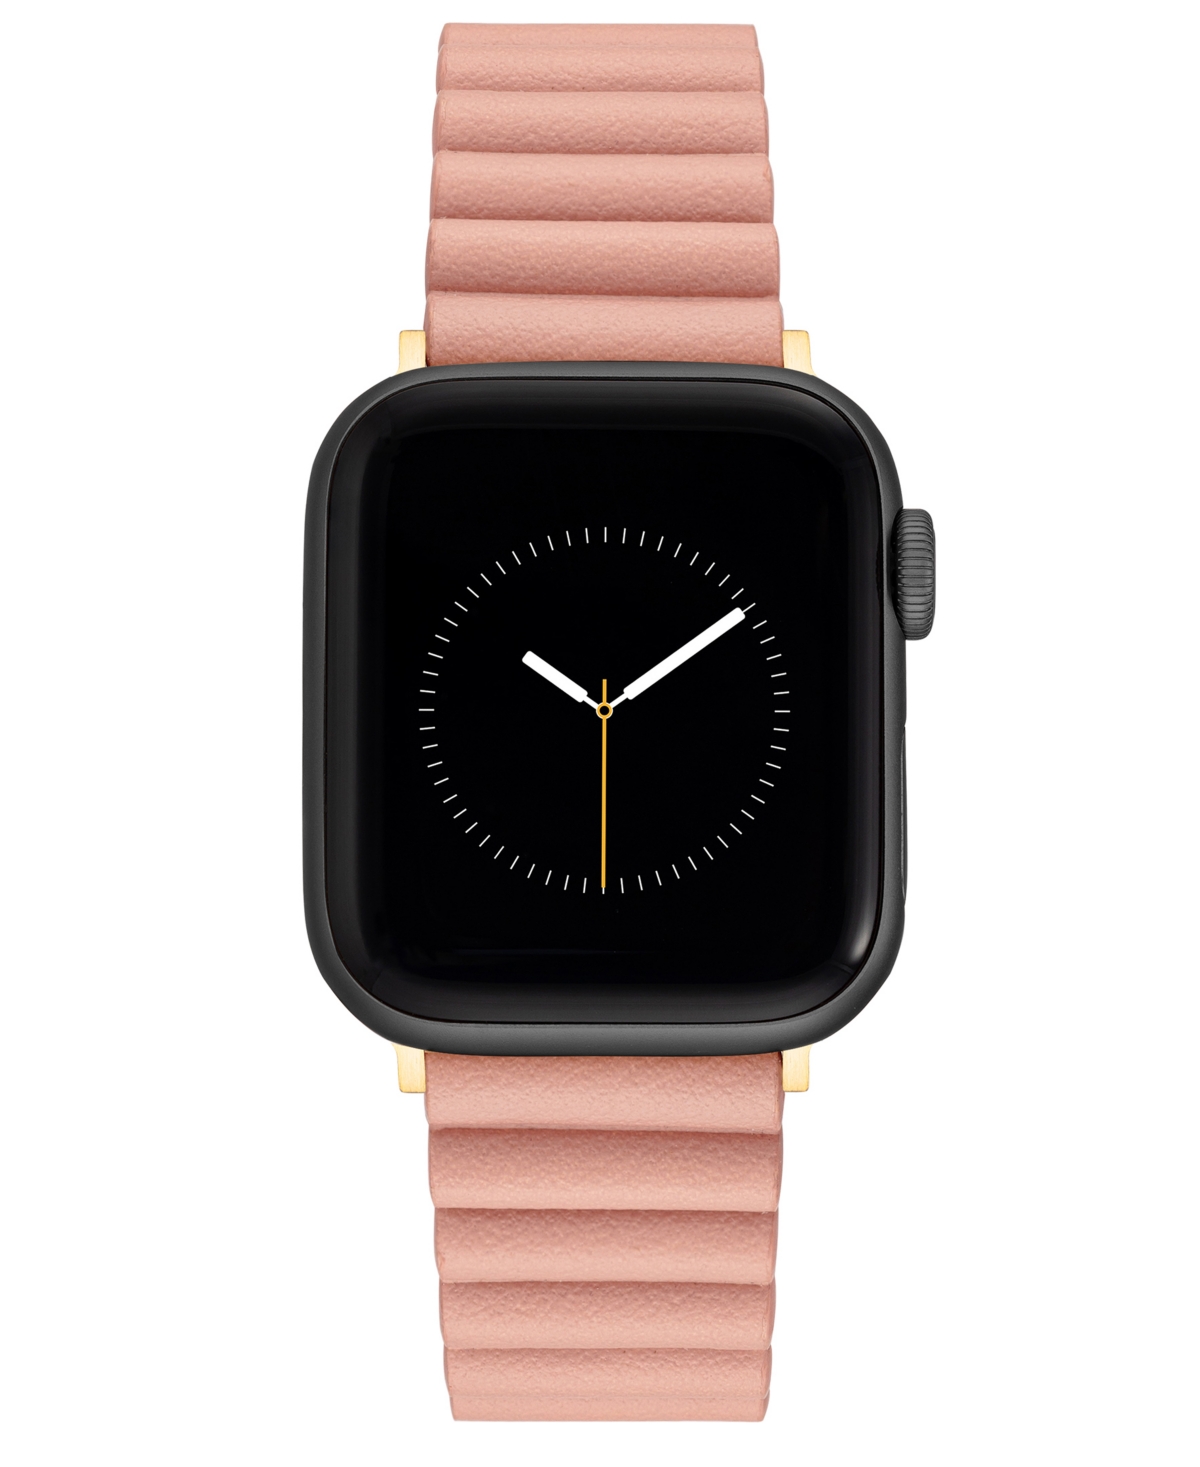 Women's Pink Polyurethane Leather Band Compatible with 38mm, 40mm and 41mm Apple Watch - Pink, Rose Gold-Tone